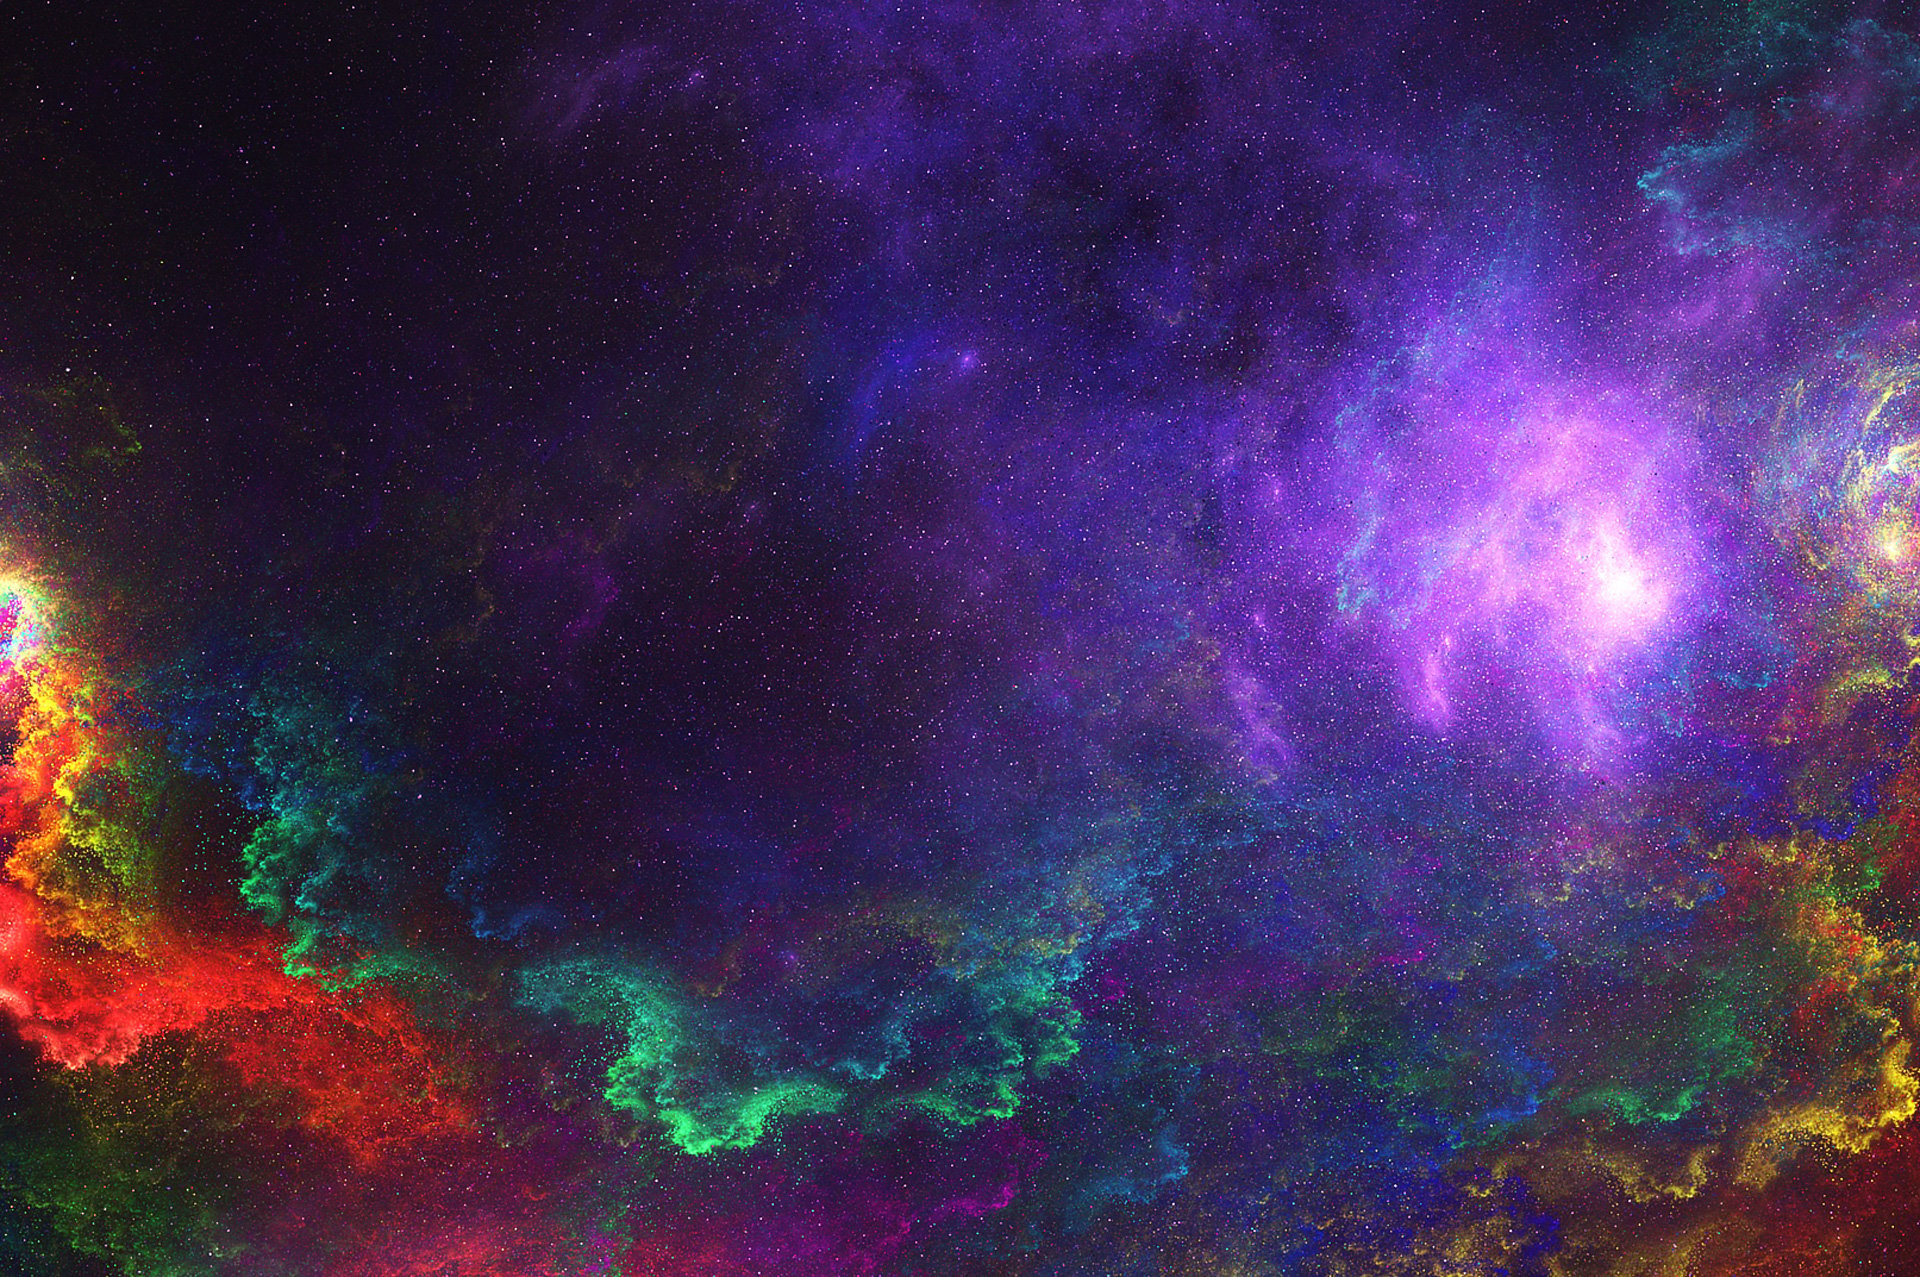 Colorful Space, HD Digital Universe, 4k Wallpaper, Image, Background, Photo and Picture